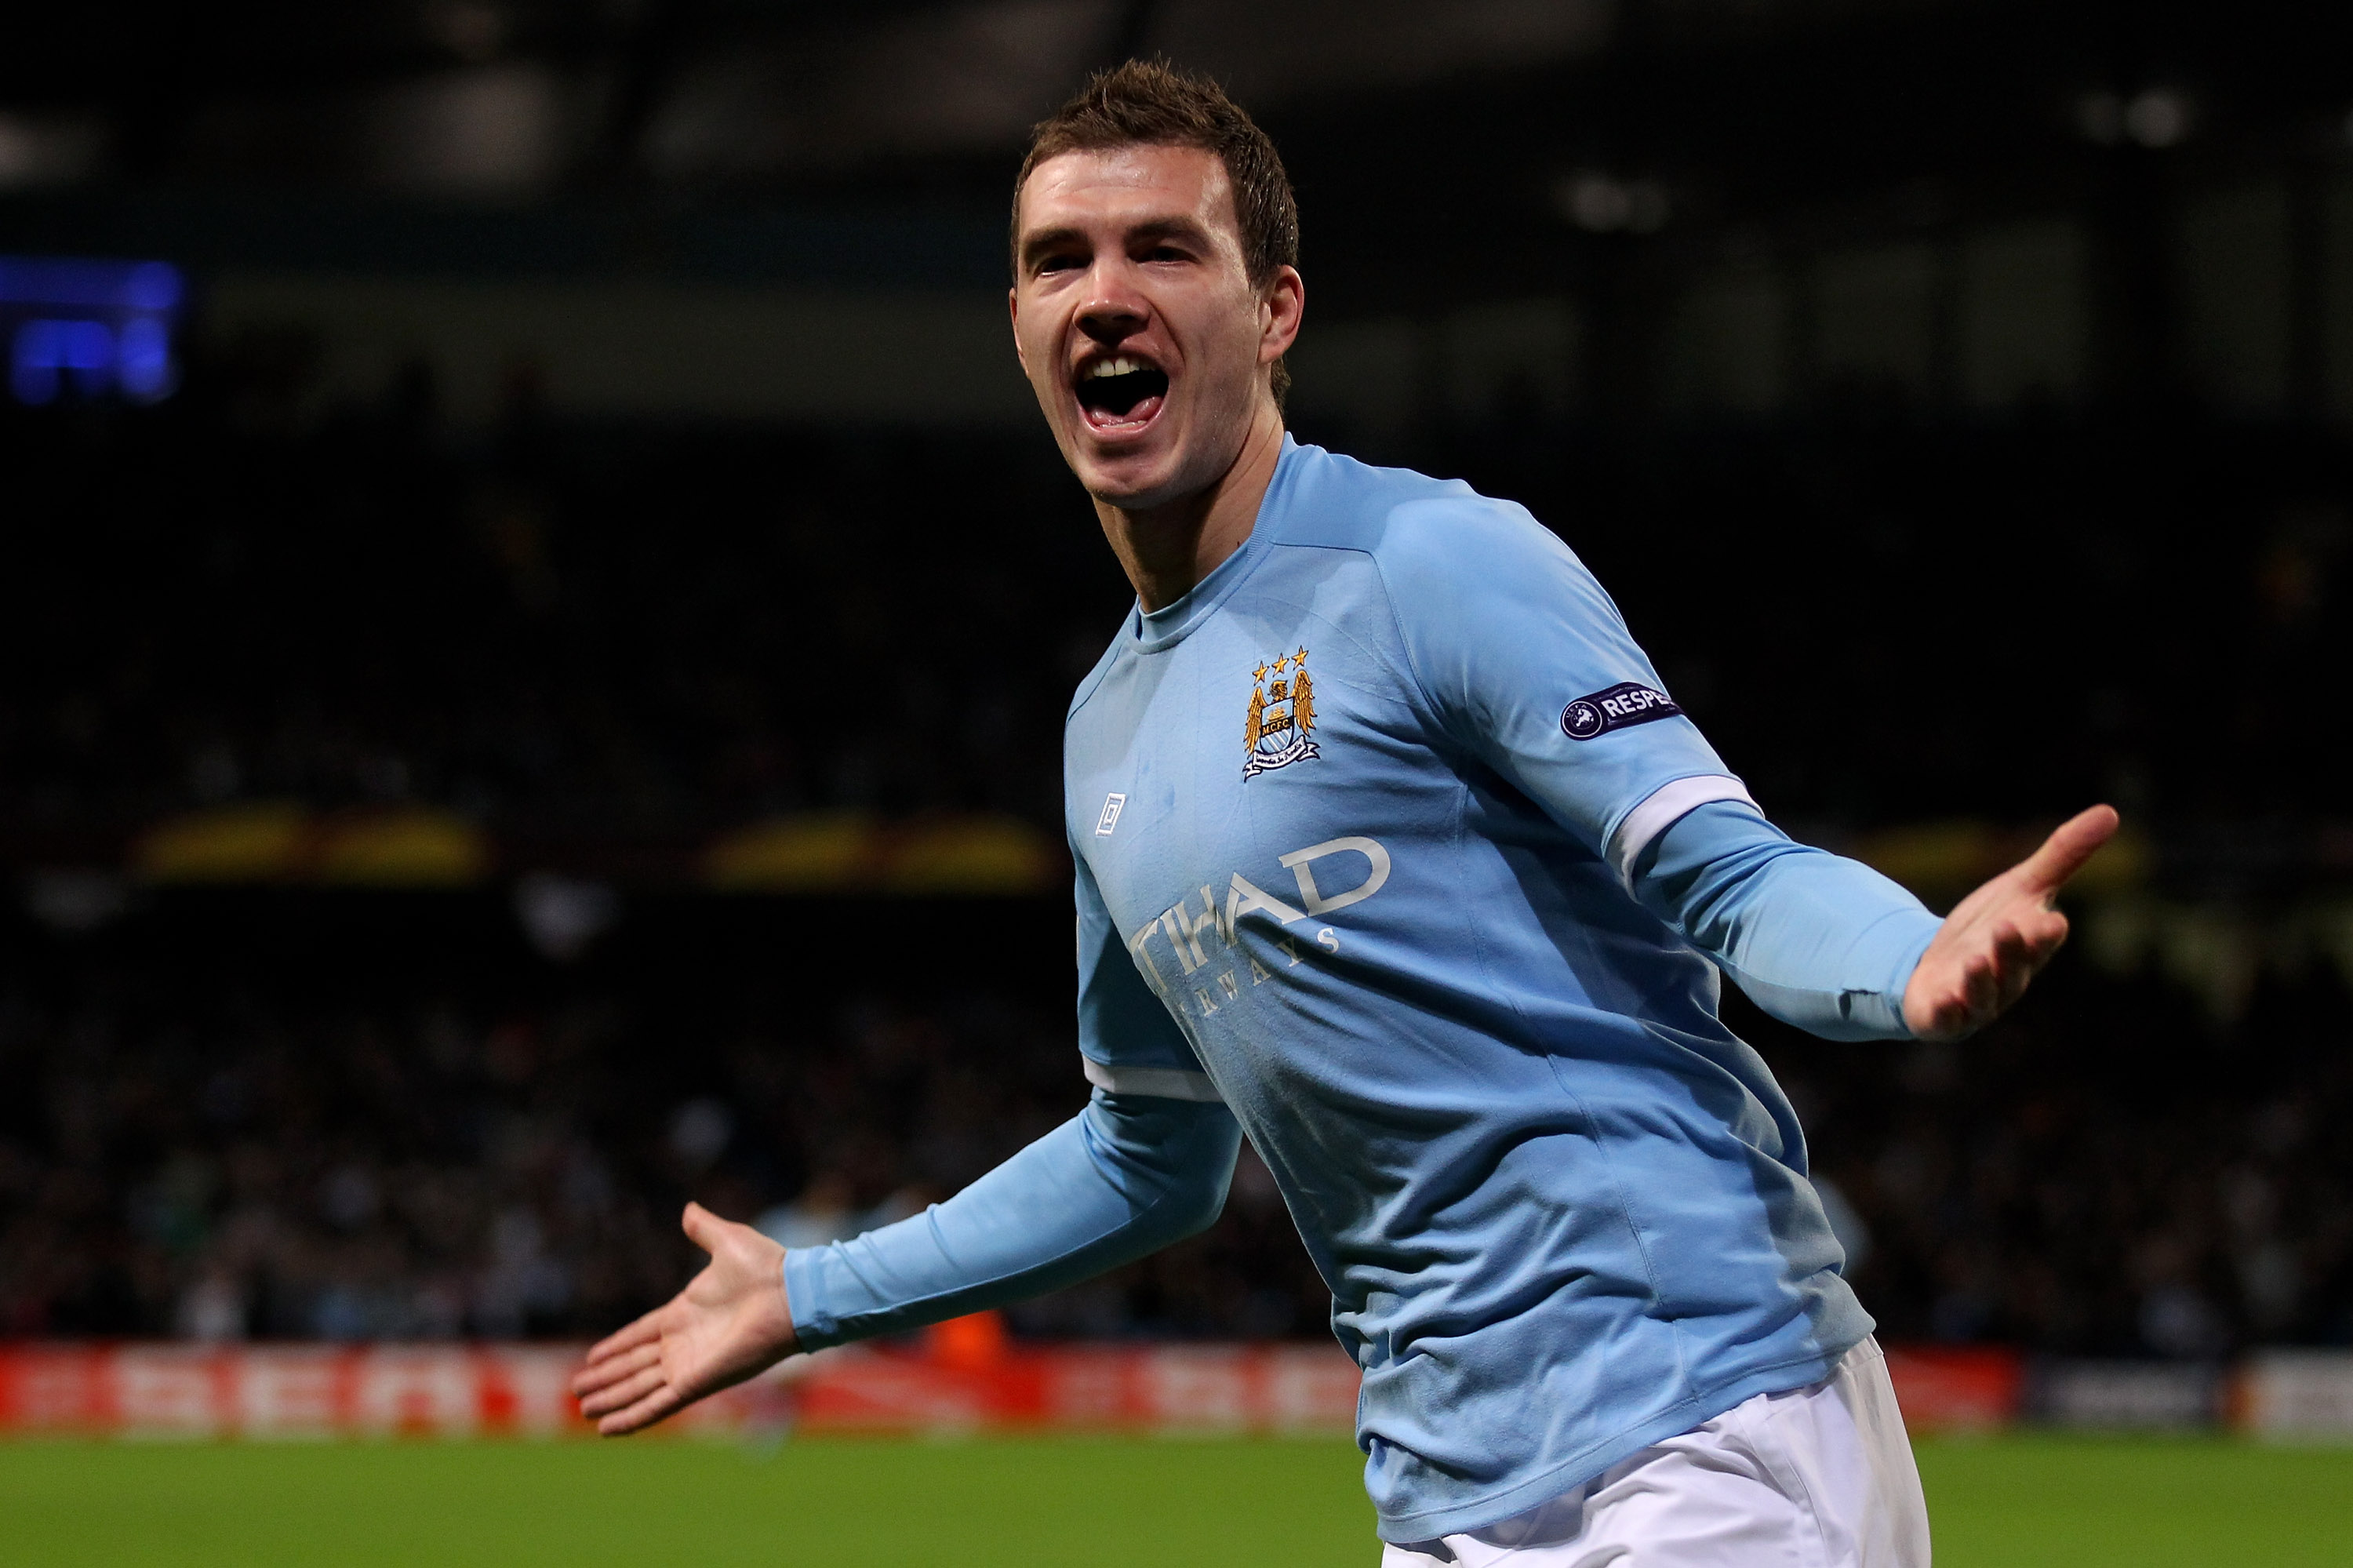 MANCHESTER, ENGLAND - FEBRUARY 24:  Edin Dzeko of City celebrates as he scores the opening goal during the UEFA Europa League round of 32 second leg match between Manchester City and Aris Saloniki at City of Manchester Stadium on February 24, 2011 in Manc